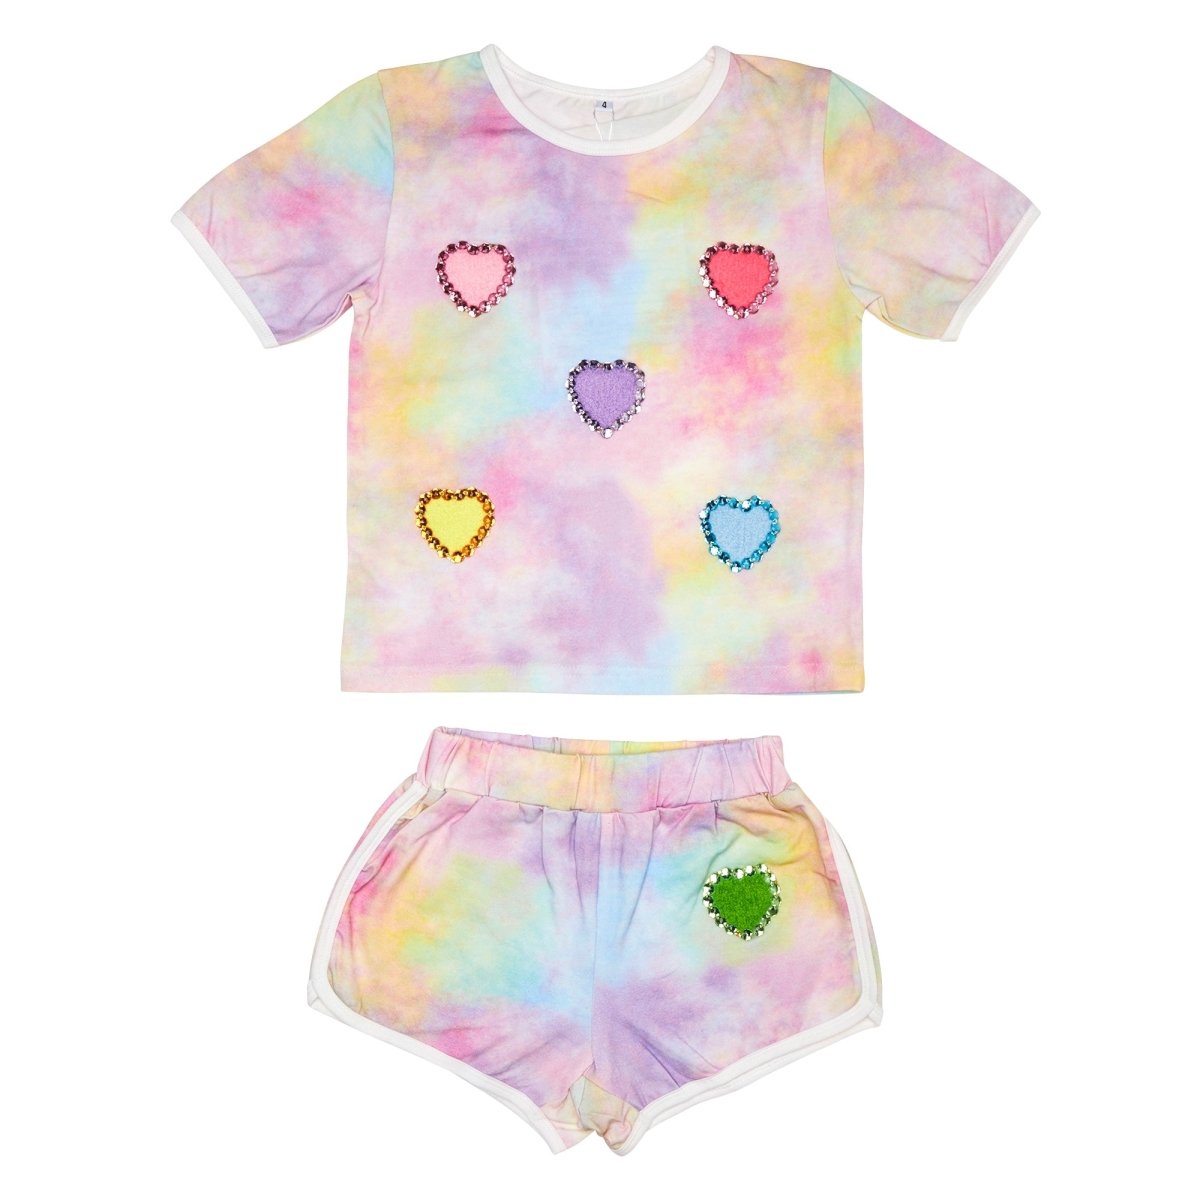 EMMA HEART PATCHES TIE DYE TOP AND SHORTS SET (PREORDER) - MINI DREAMERS